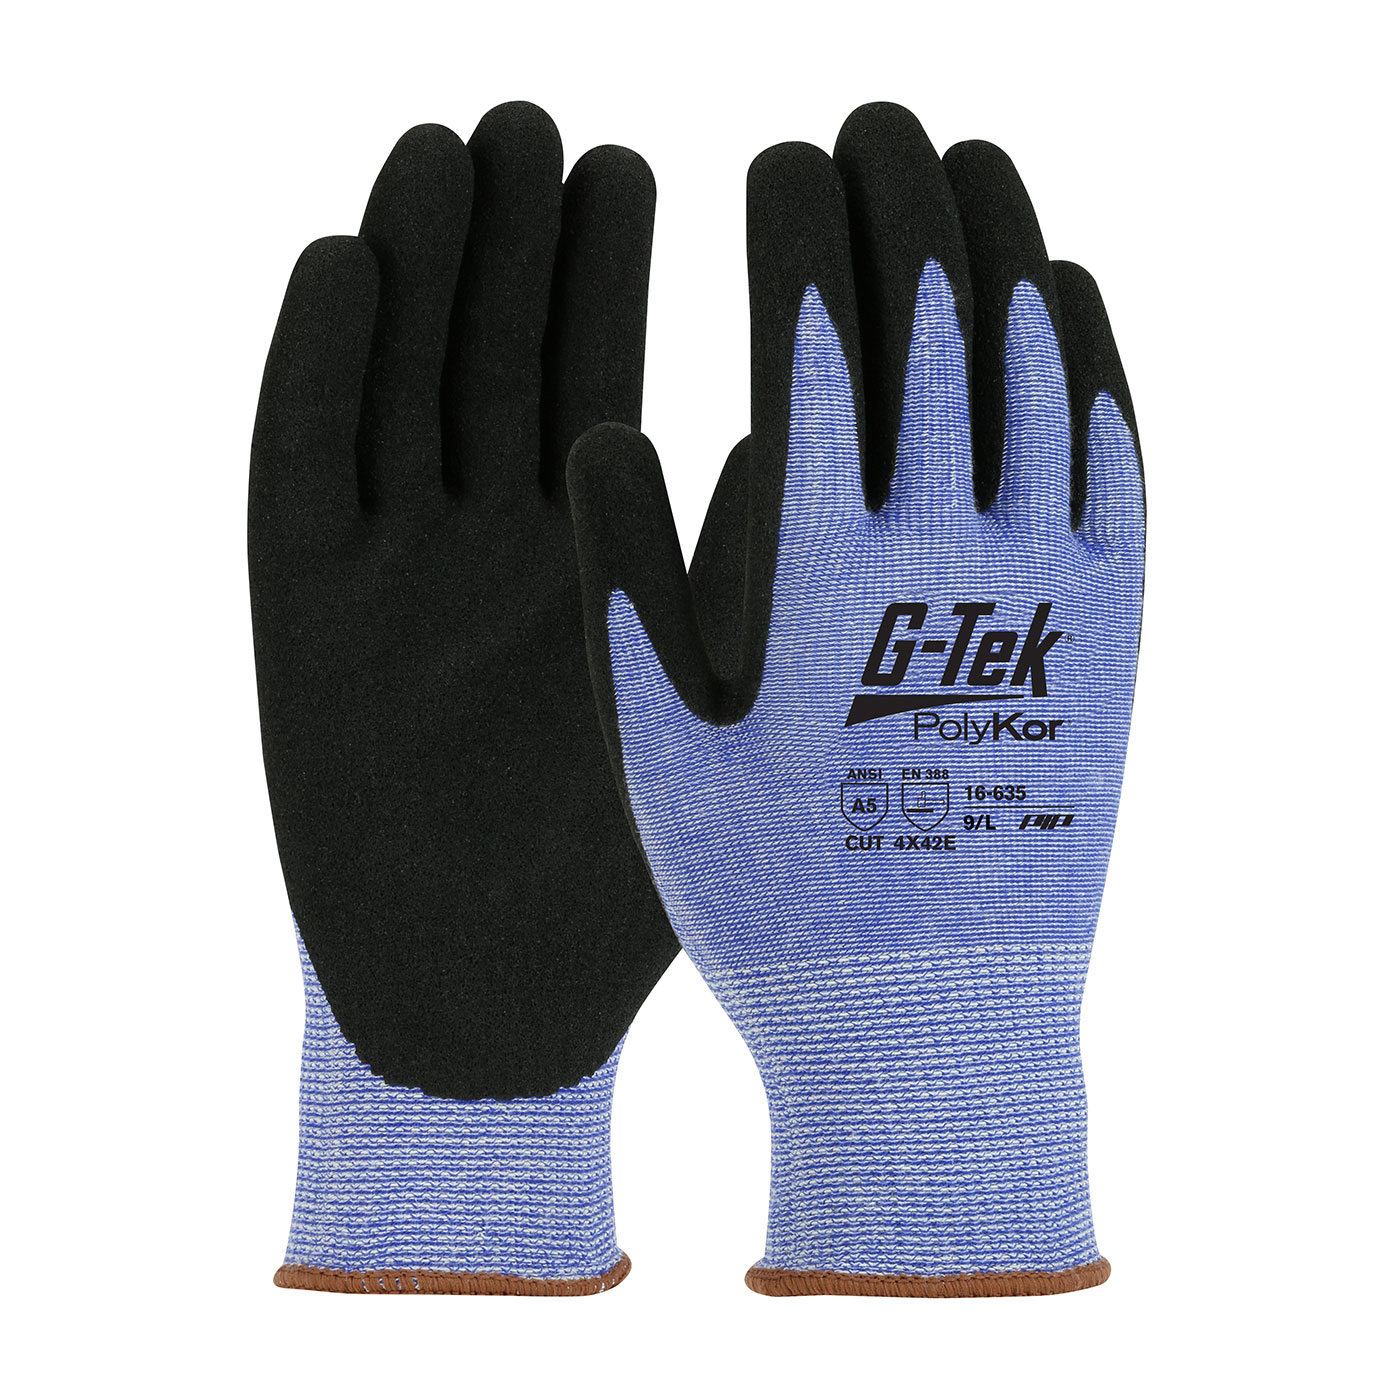 PIP 16-635/S G-Tek PolyKor Seamless Knit PolyKor Blended Glove with Nitrile Coated MicroSurface Grip on Palm & Fingers - Small PID-16635S